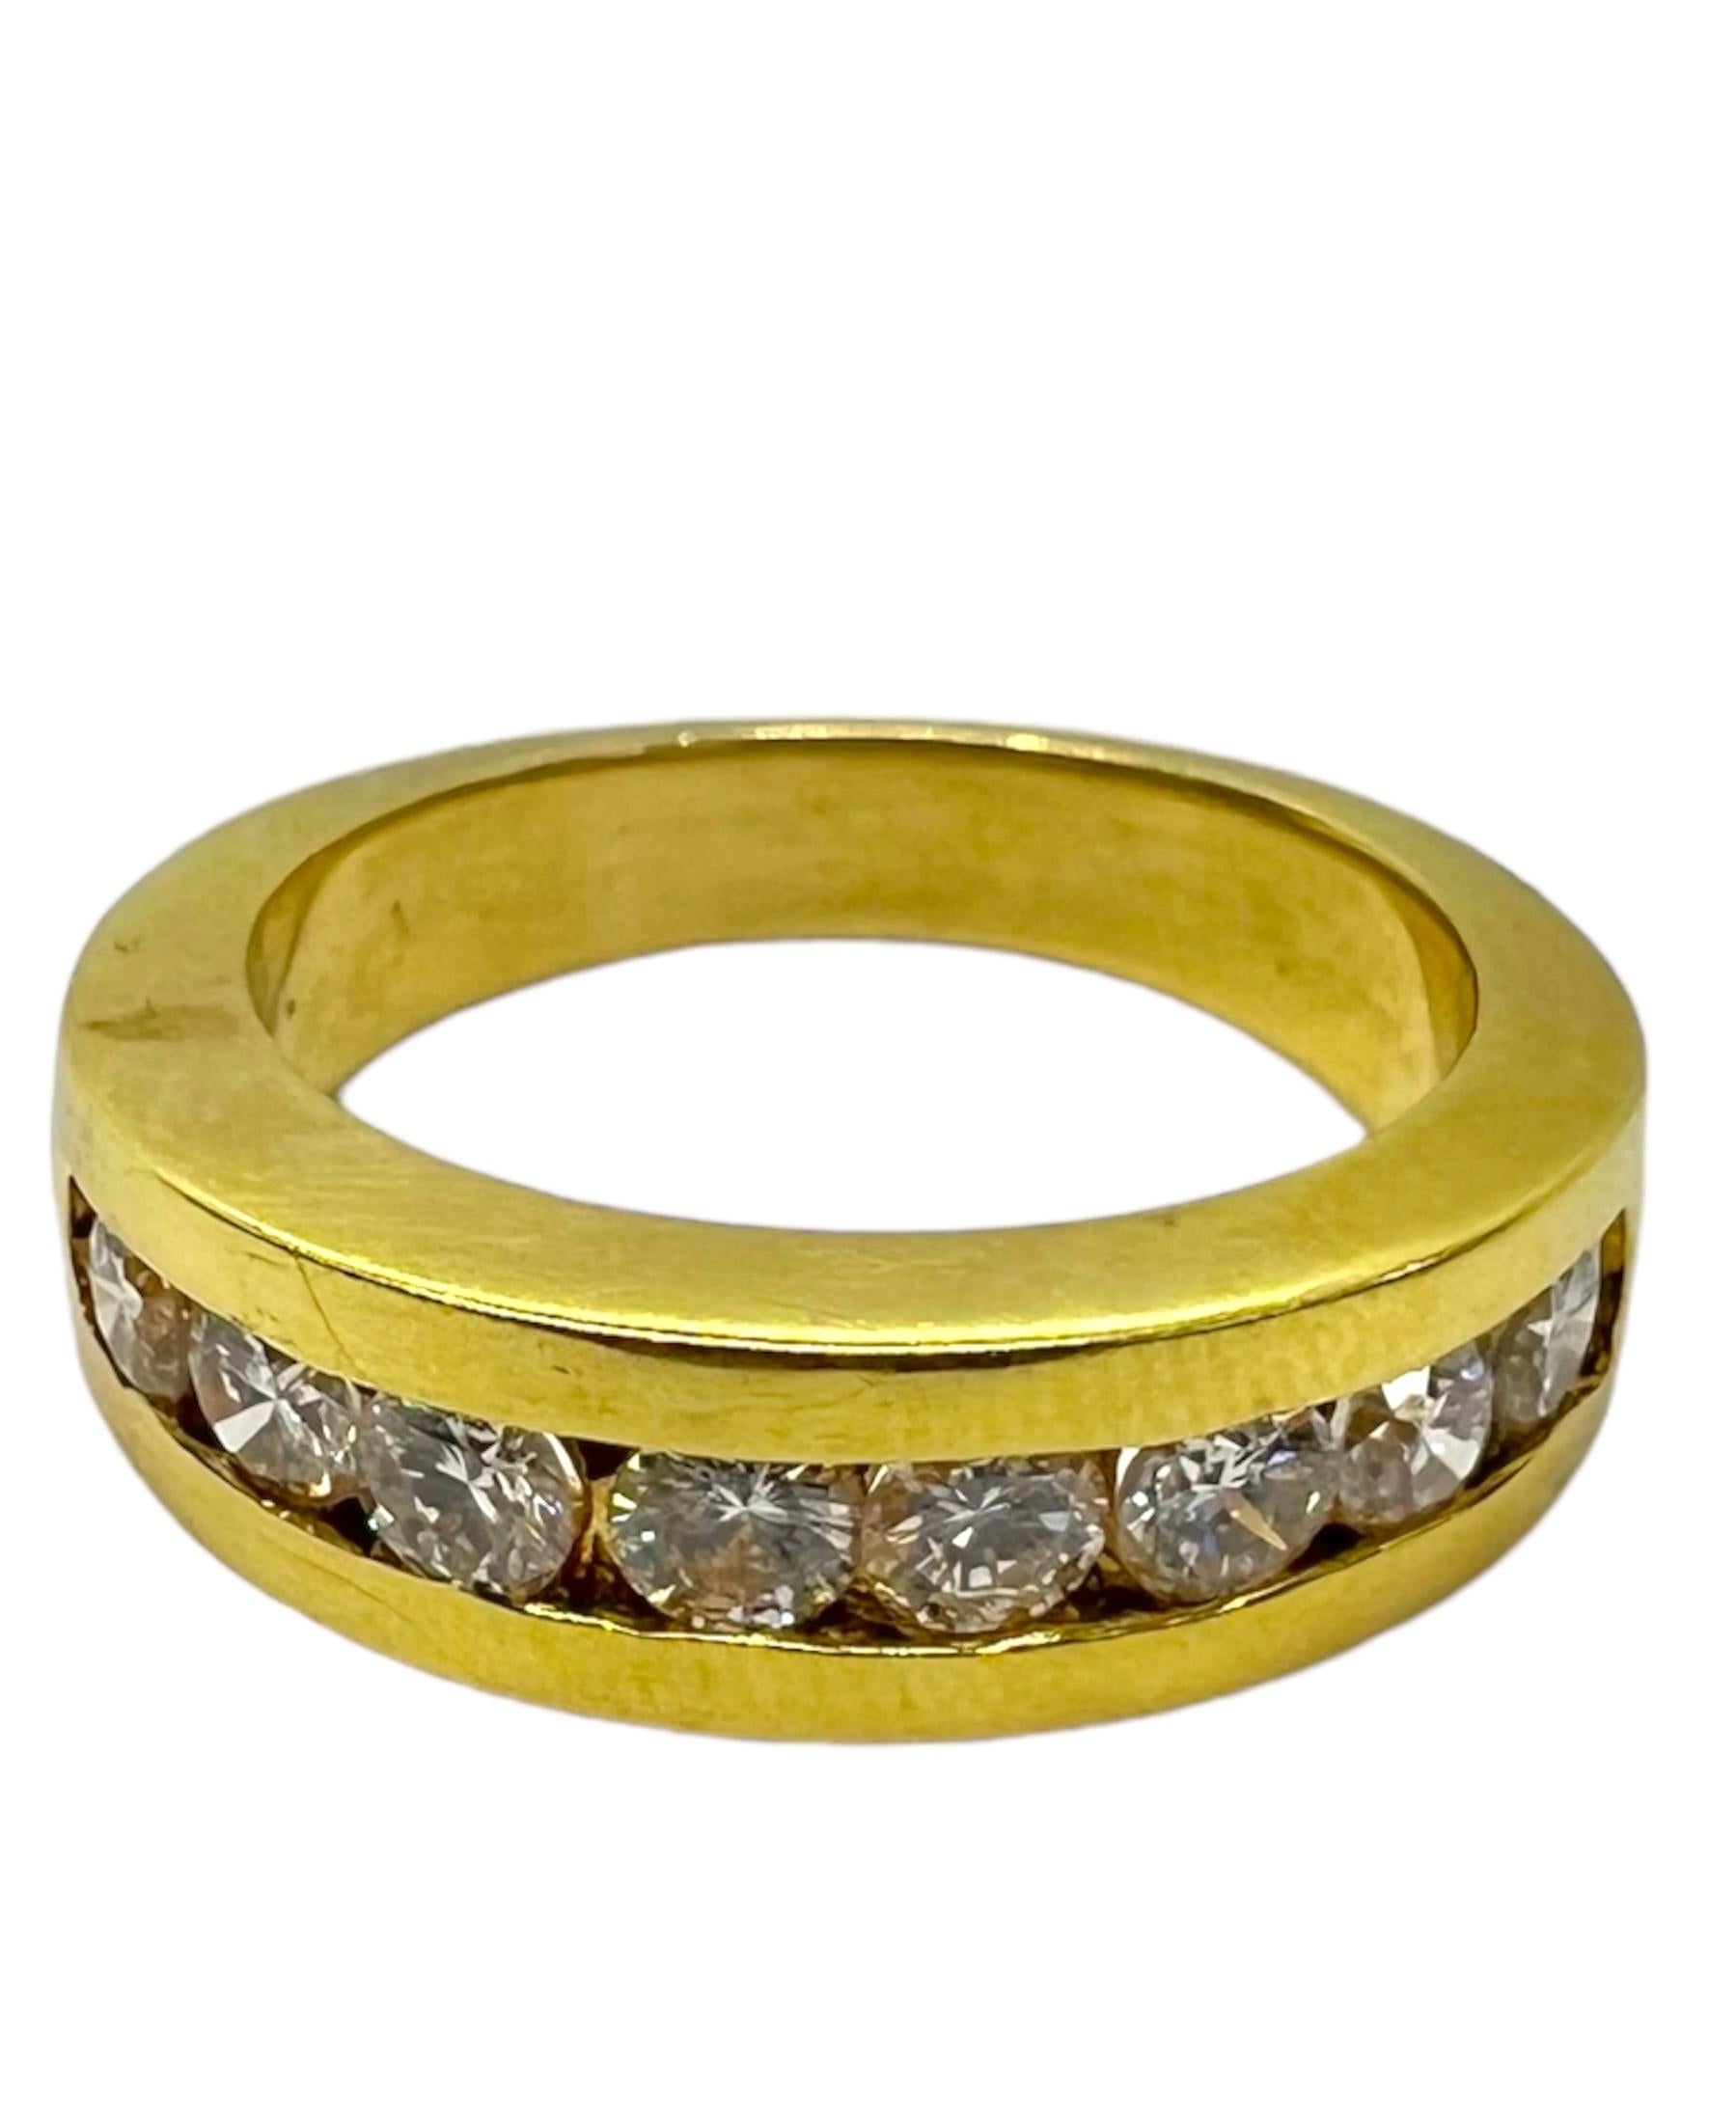 18K yellow gold ring with small diamonds.

Sophia D by Joseph Dardashti LTD has been known worldwide for 35 years and are inspired by classic Art Deco design that merges with modern manufacturing techniques. 